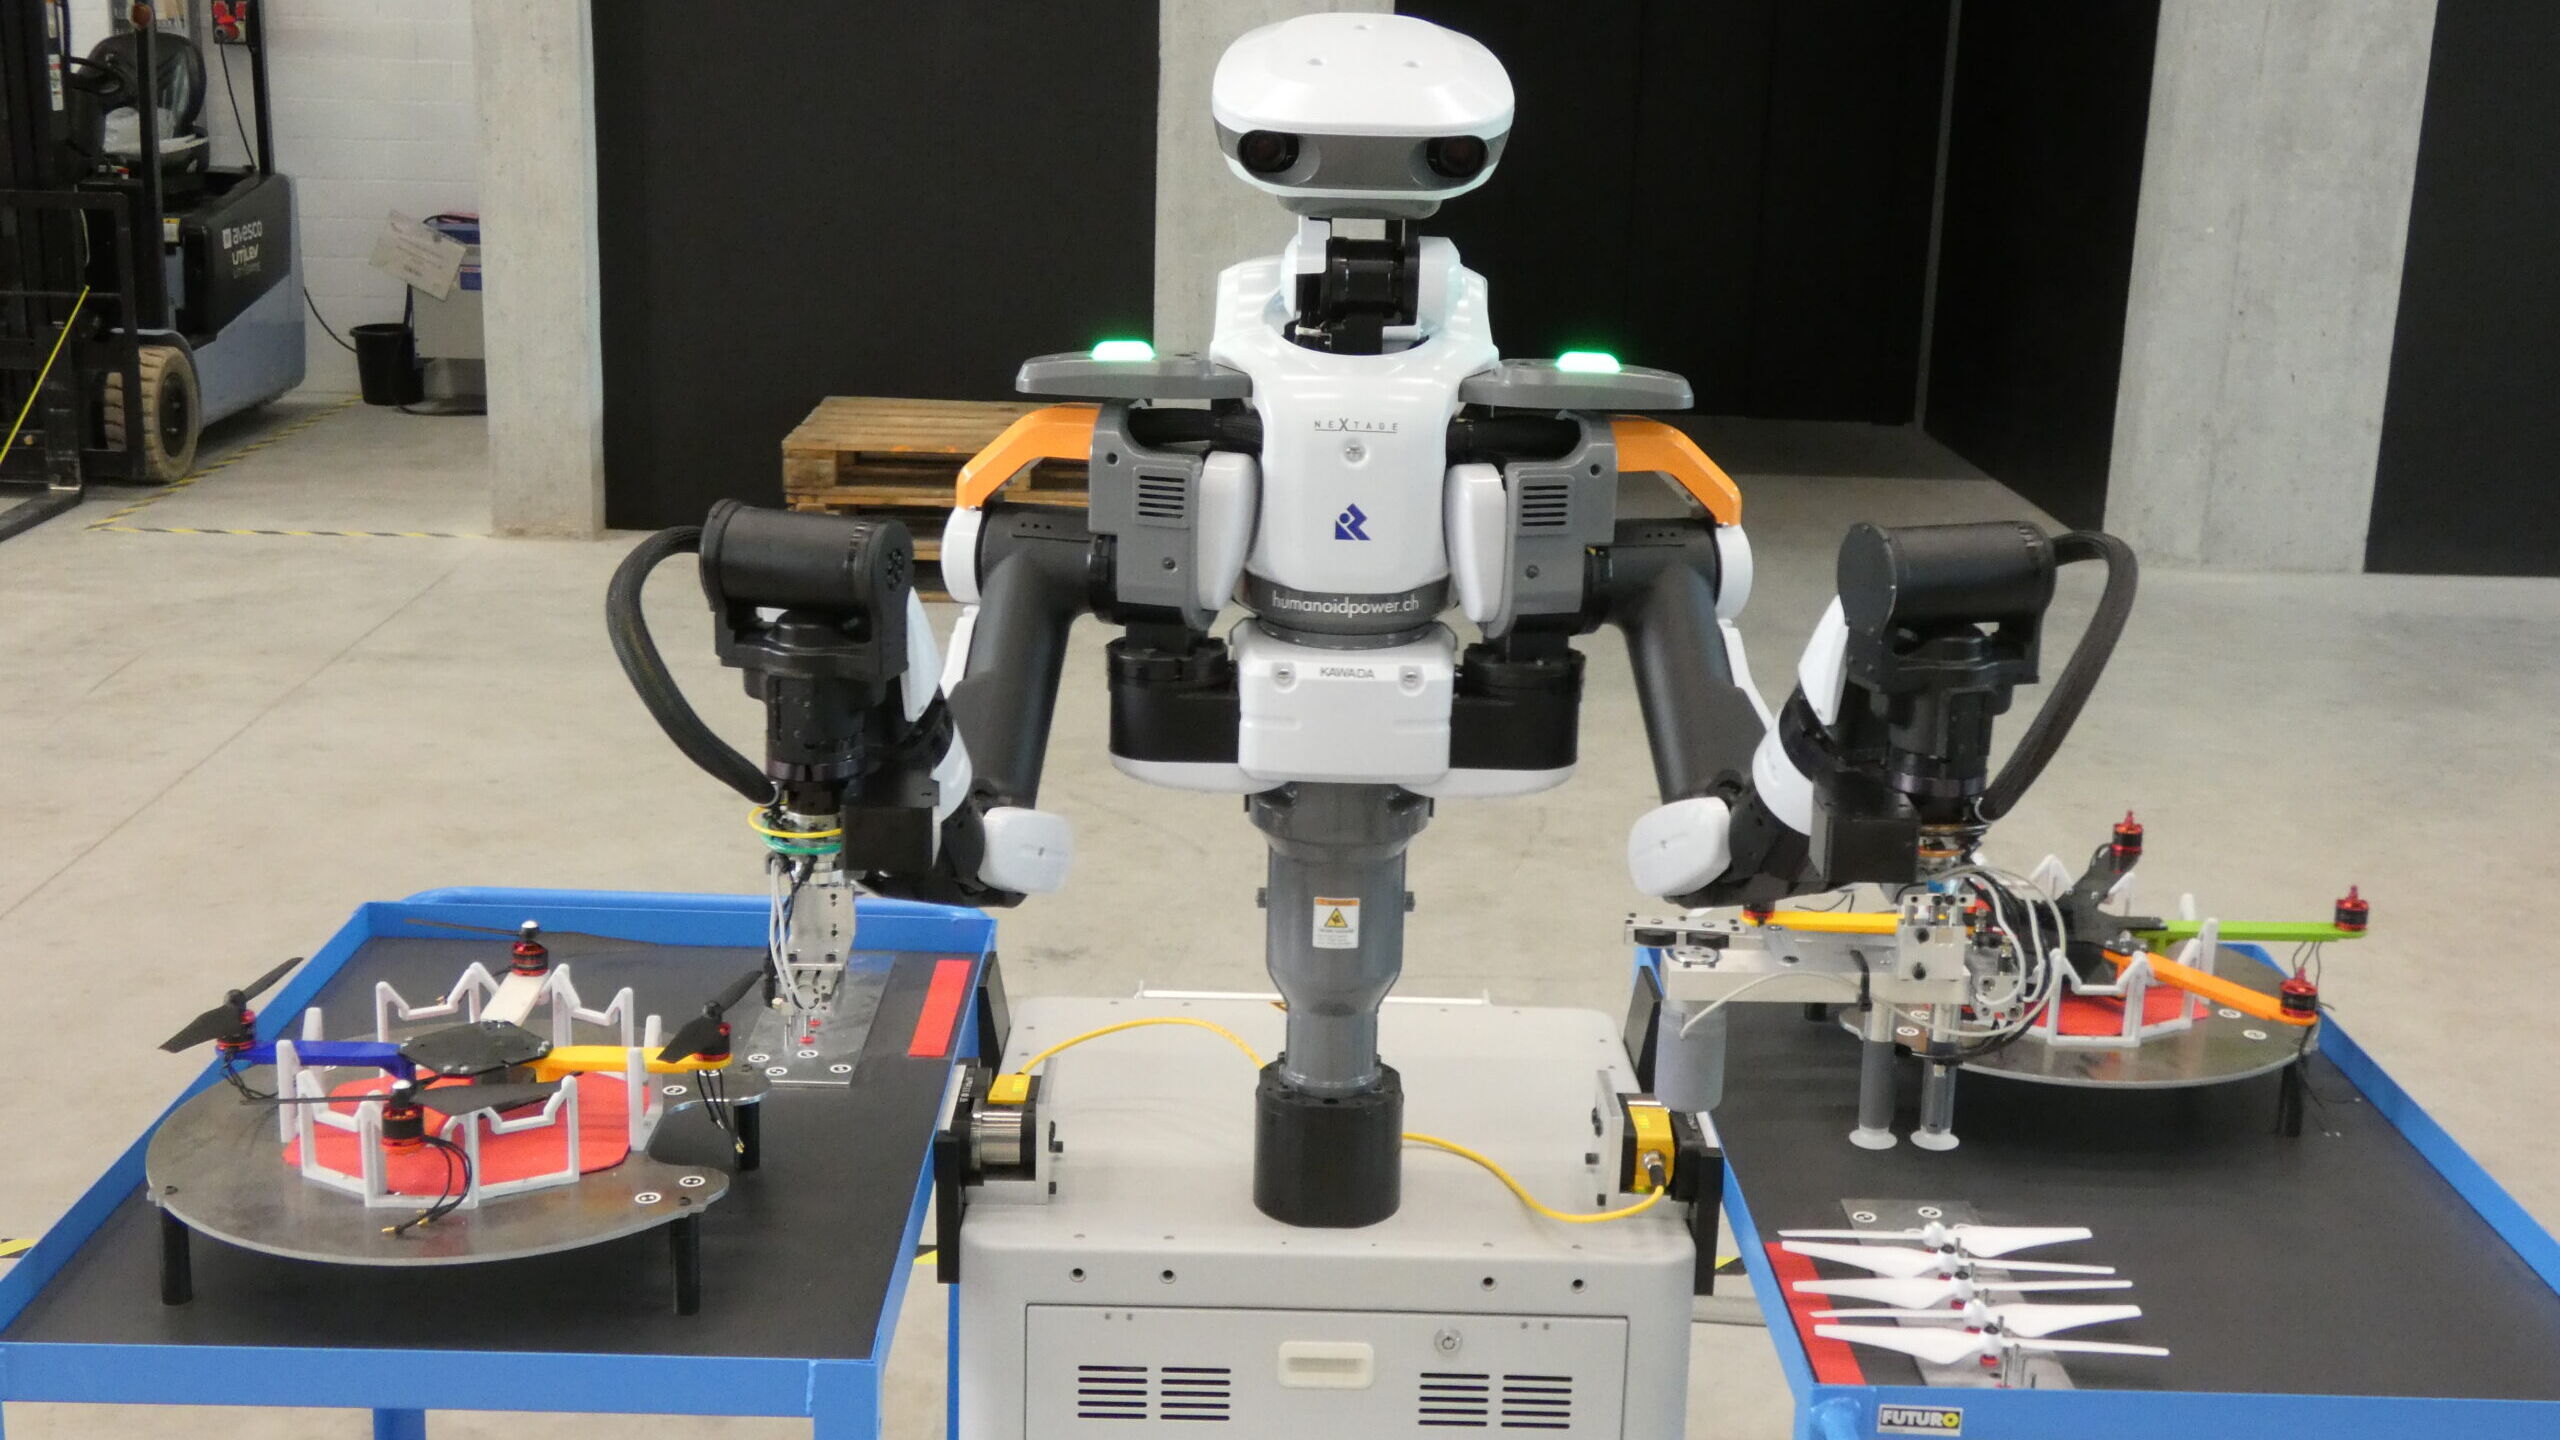 A robot from the drone assembly line of the Innovation Park in Biel/Bienne